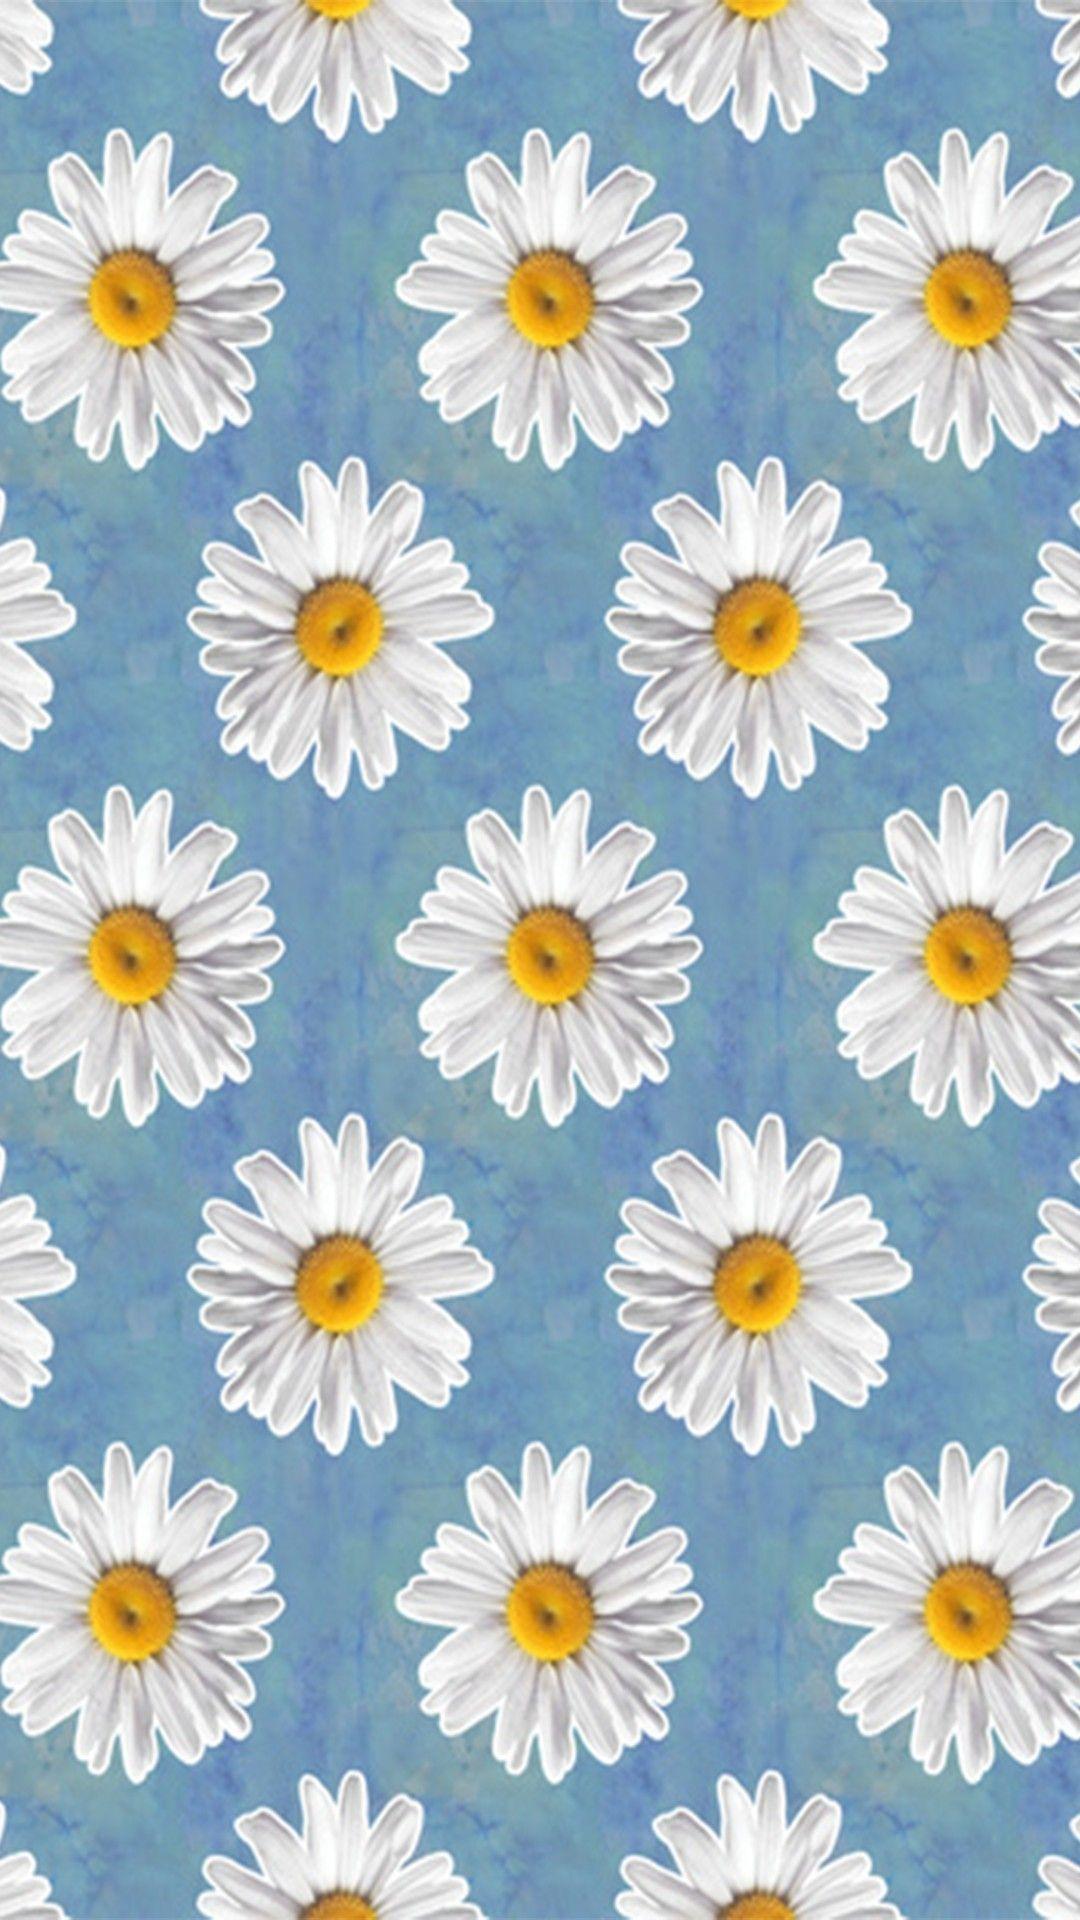 Daisy Iphone Wallpapers Top Free Daisy Iphone Backgrounds Wallpaperaccess